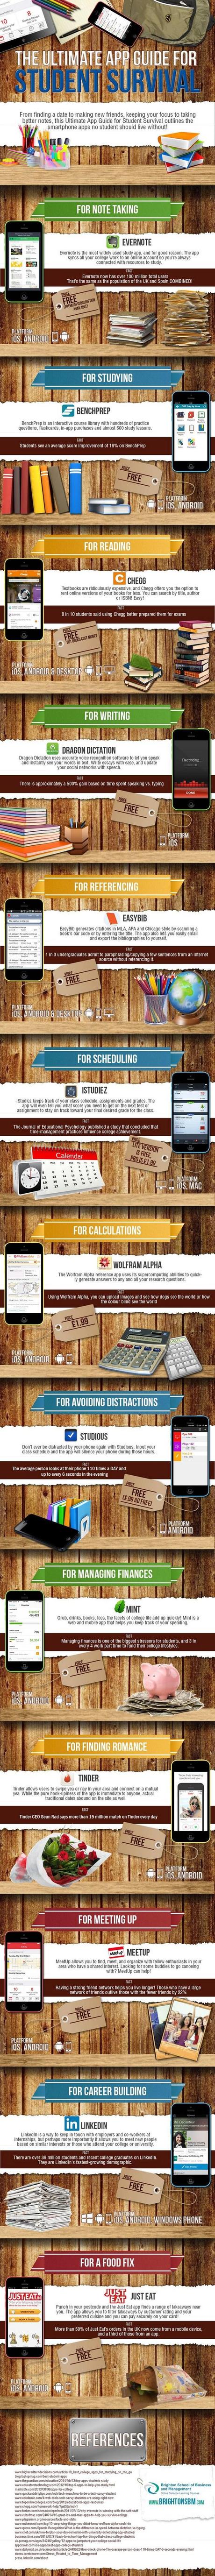 The Ultimate App Guide for Student Survival infographic